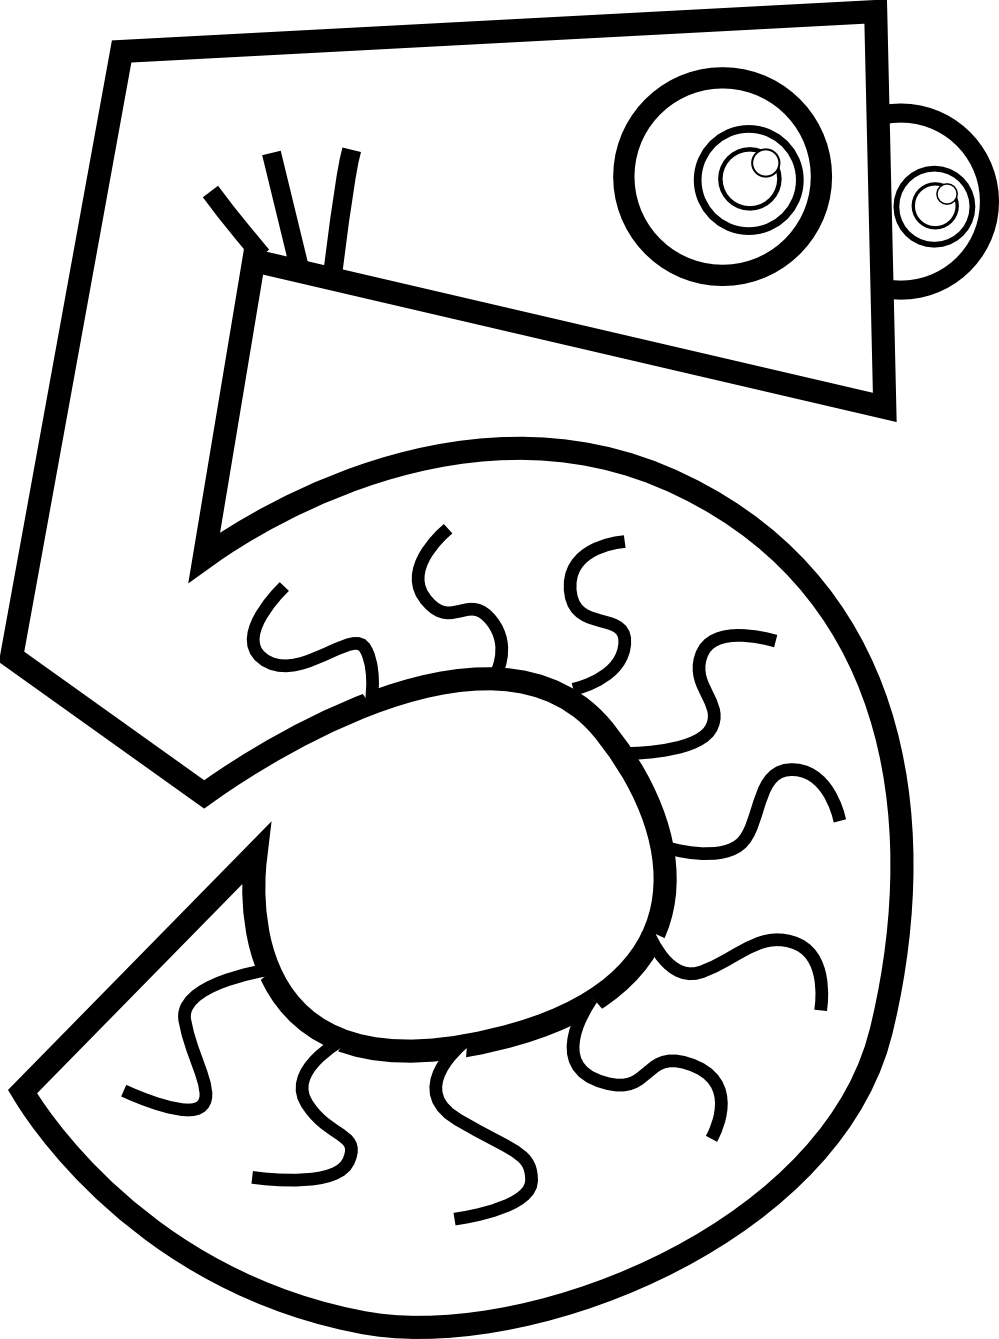 Numbers clipart black.